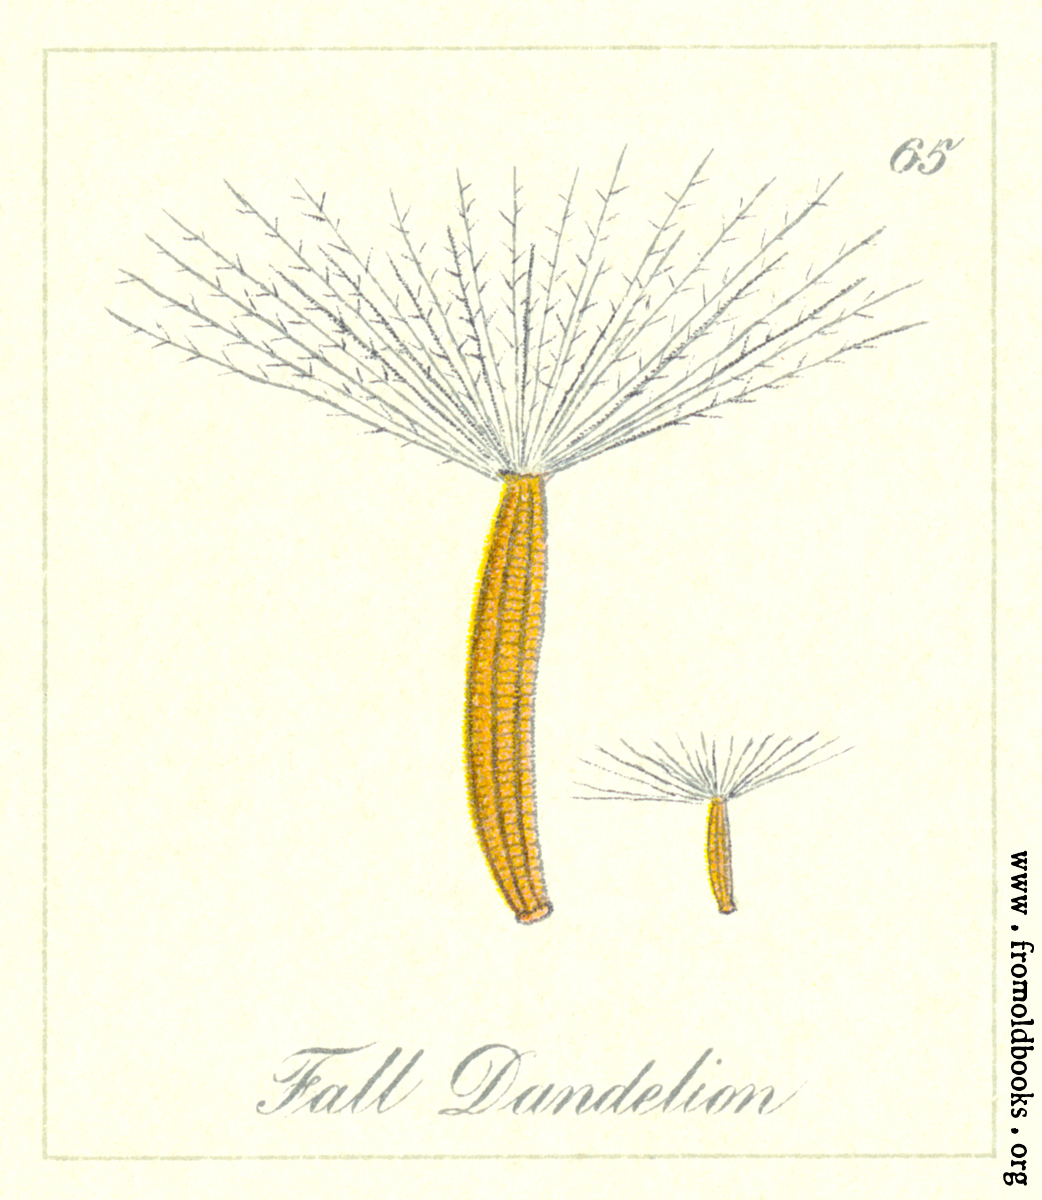 [Picture: 65. Fall Dandelion Seeds]